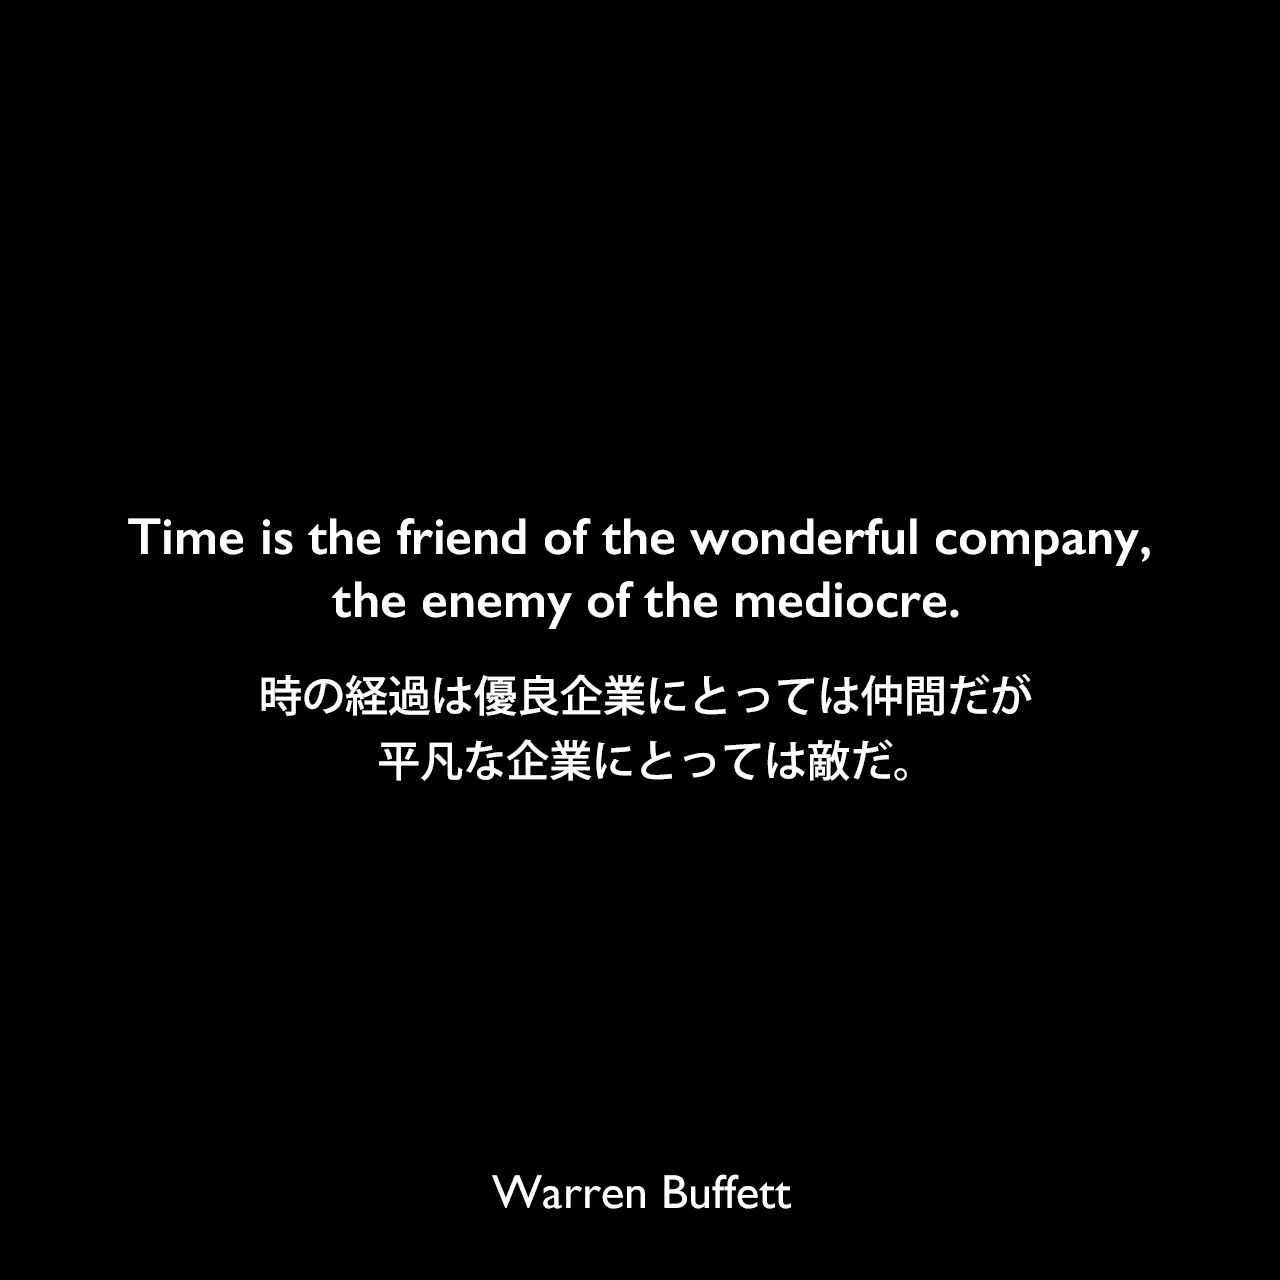 Time is the friend of the wonderful company, the enemy of the mediocre.時の経過は優良企業にとっては仲間だが、平凡な企業にとっては敵だ。Warren Buffett